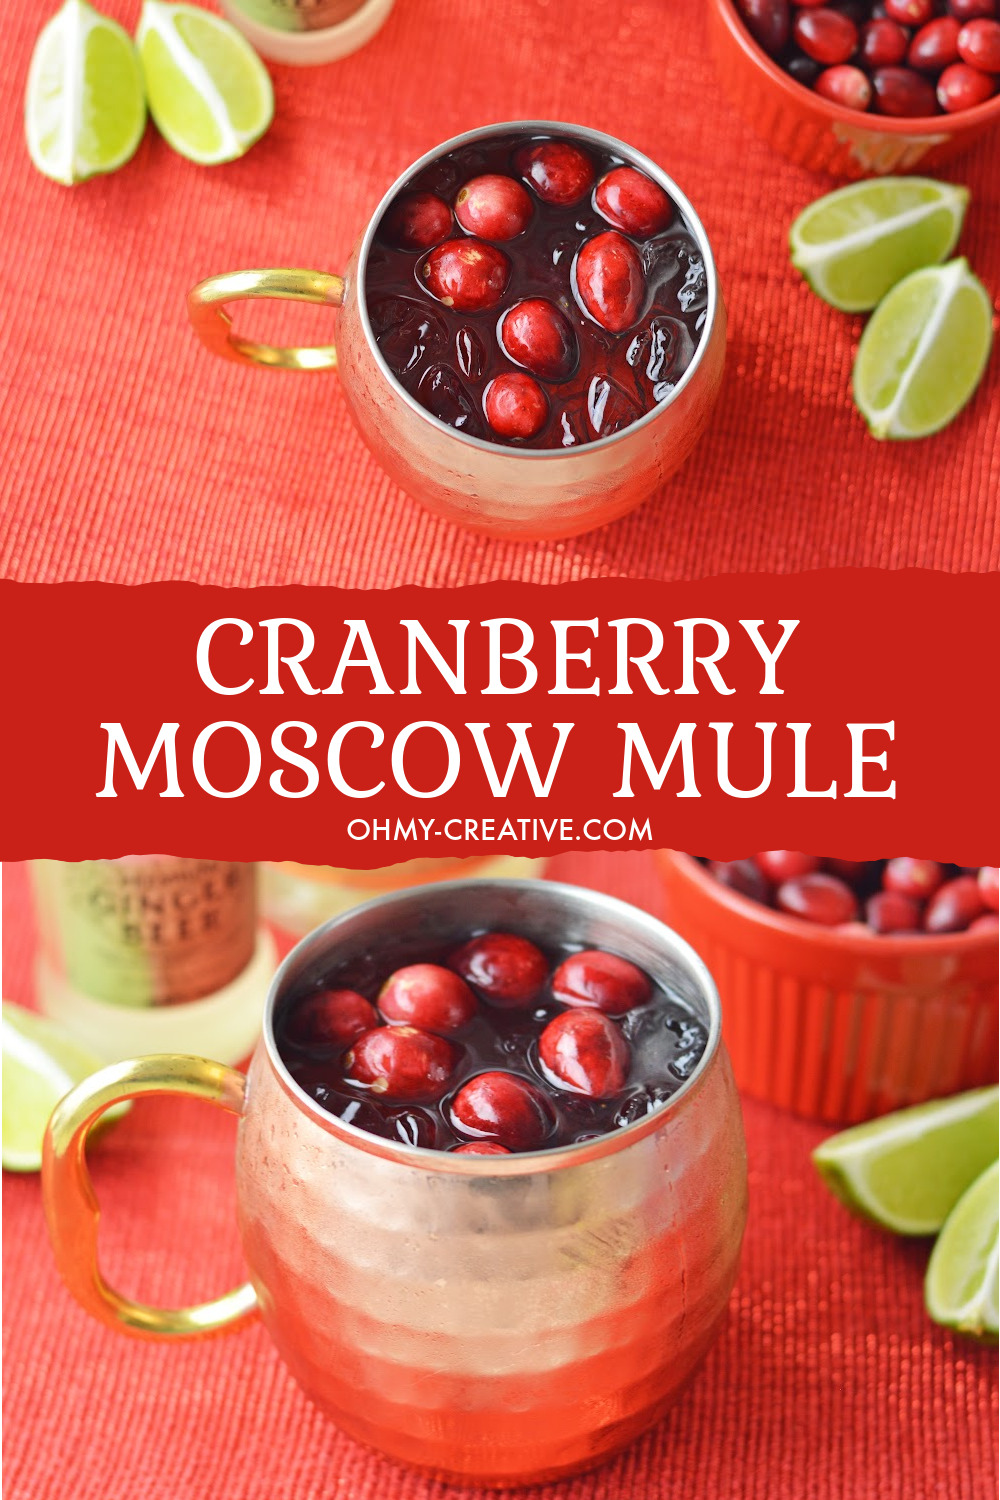 Fresh cranberries garnish this Christmas cranberry Moscow mule.